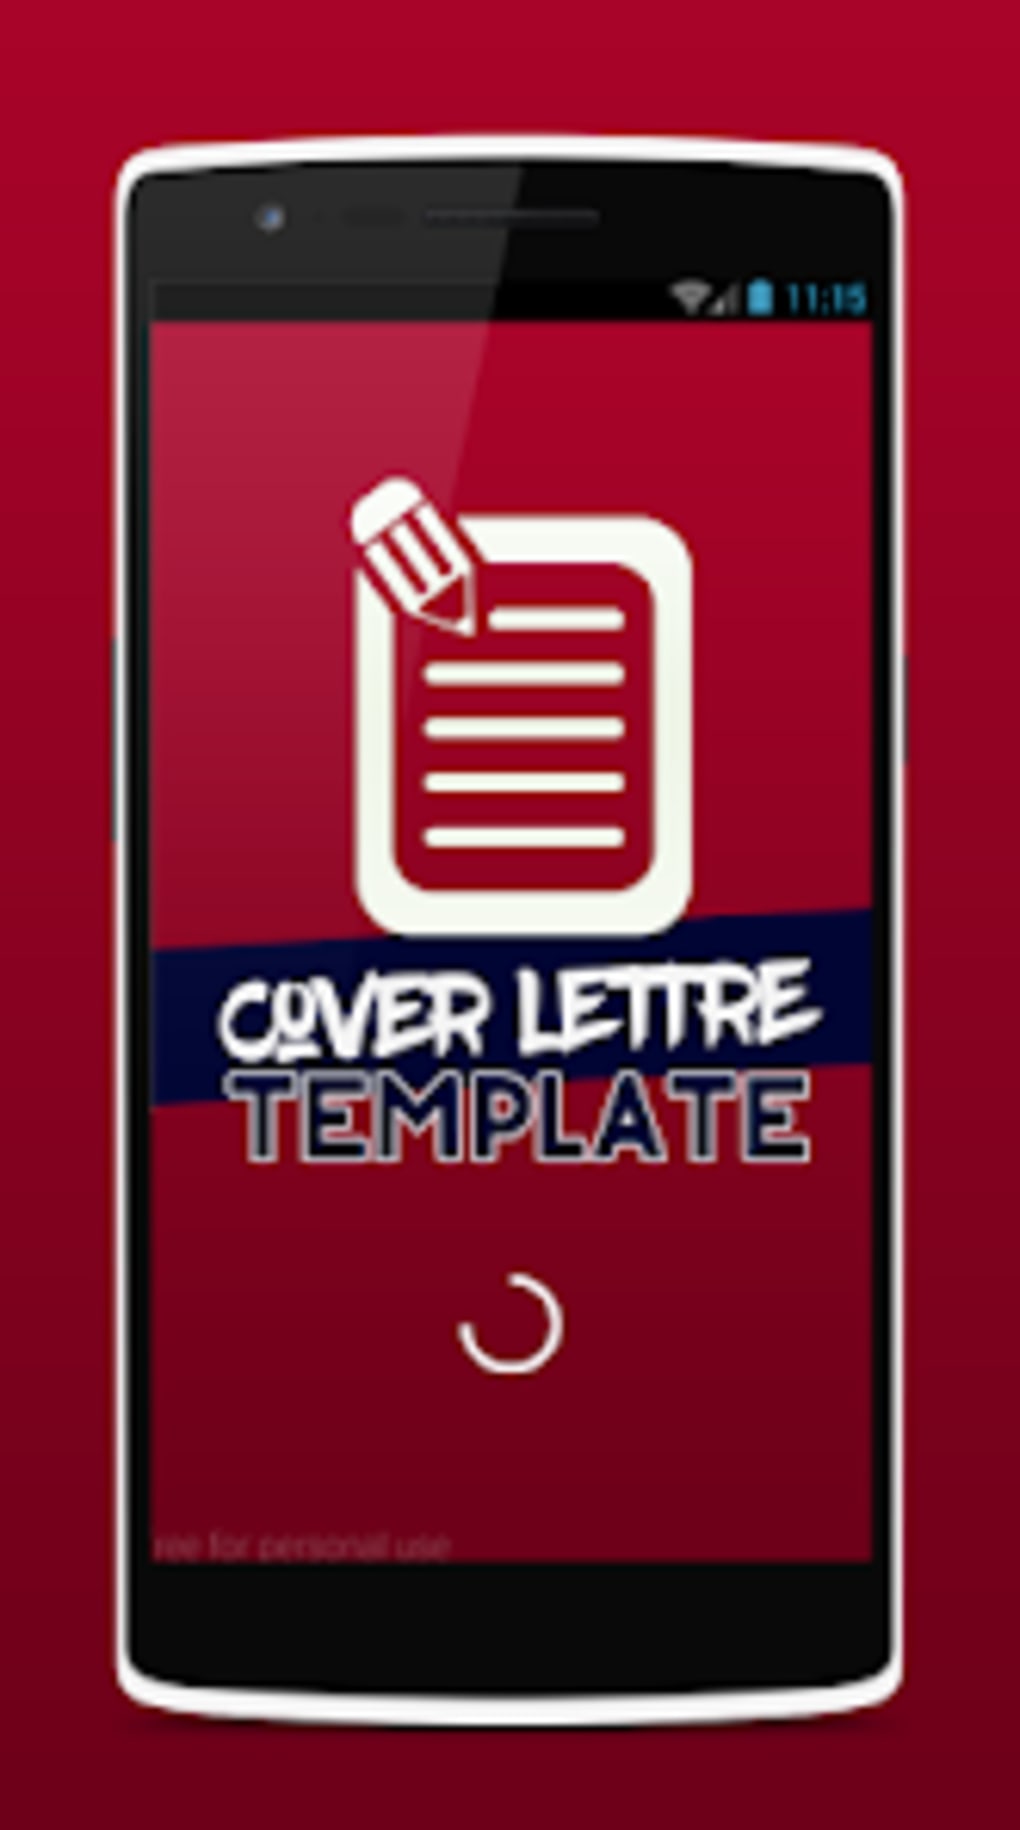 cover-letter-template-para-android-download